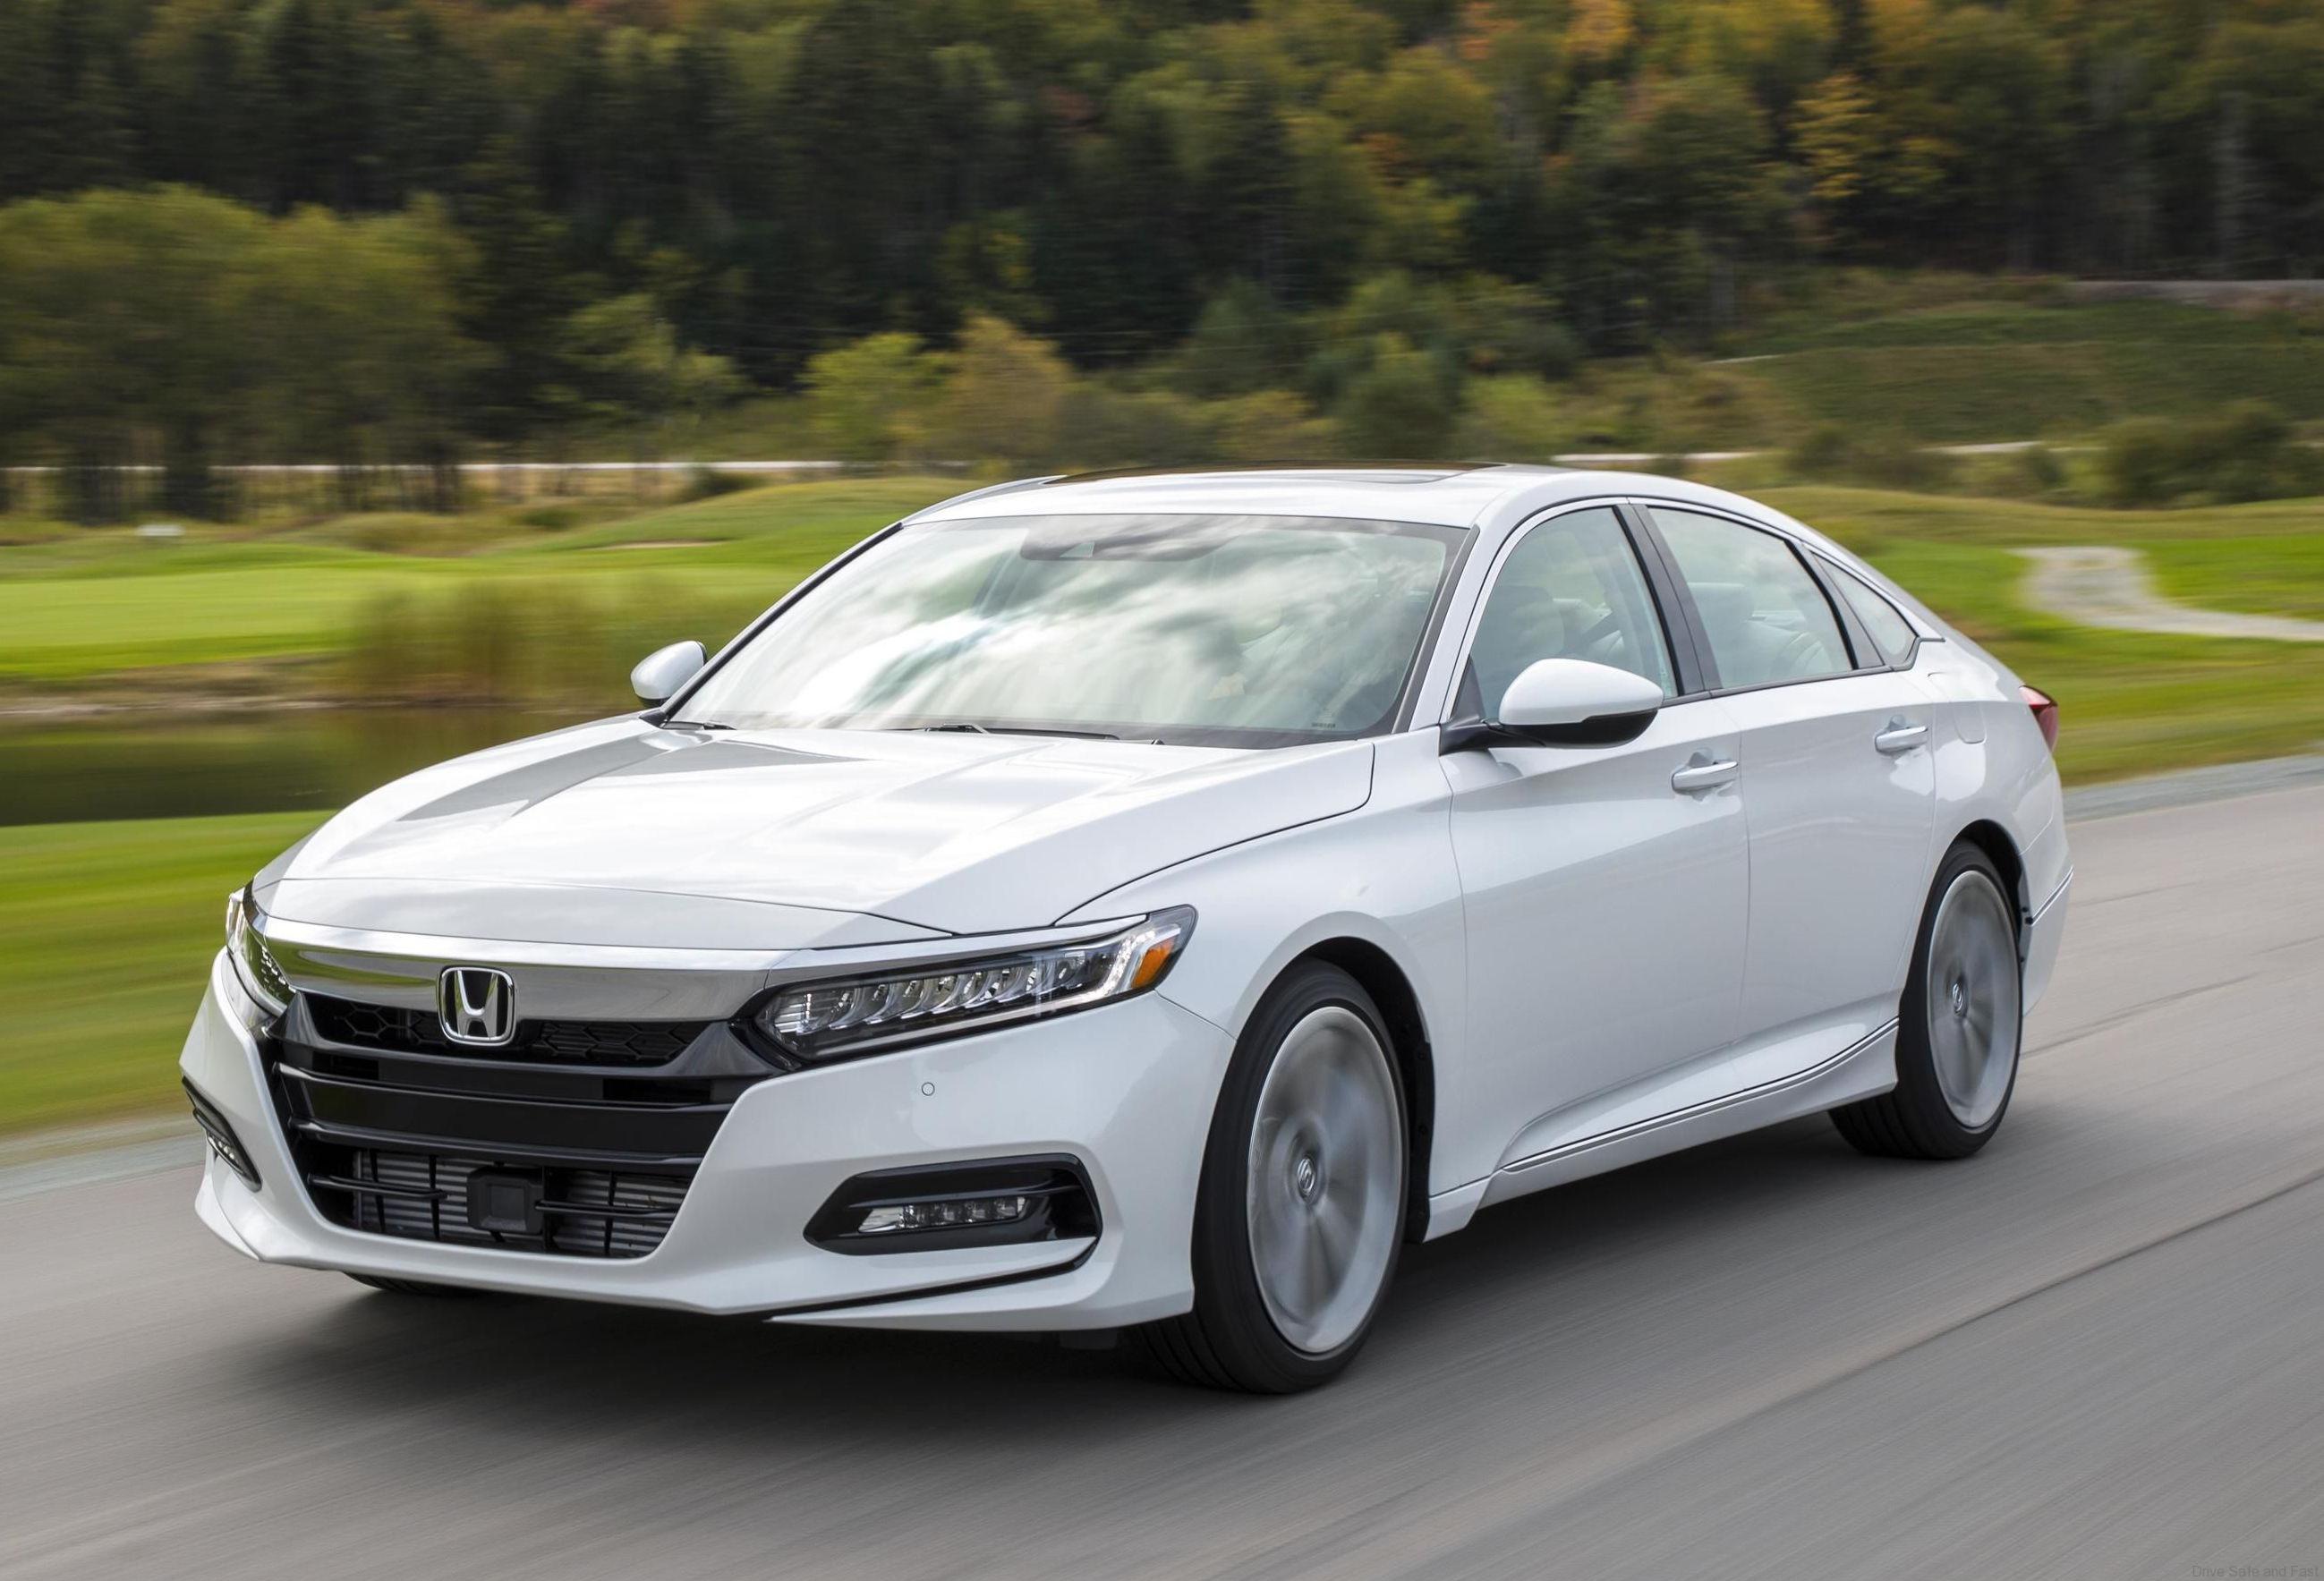 Honda Accord, America’s best-selling car over the past 41 years – Drive